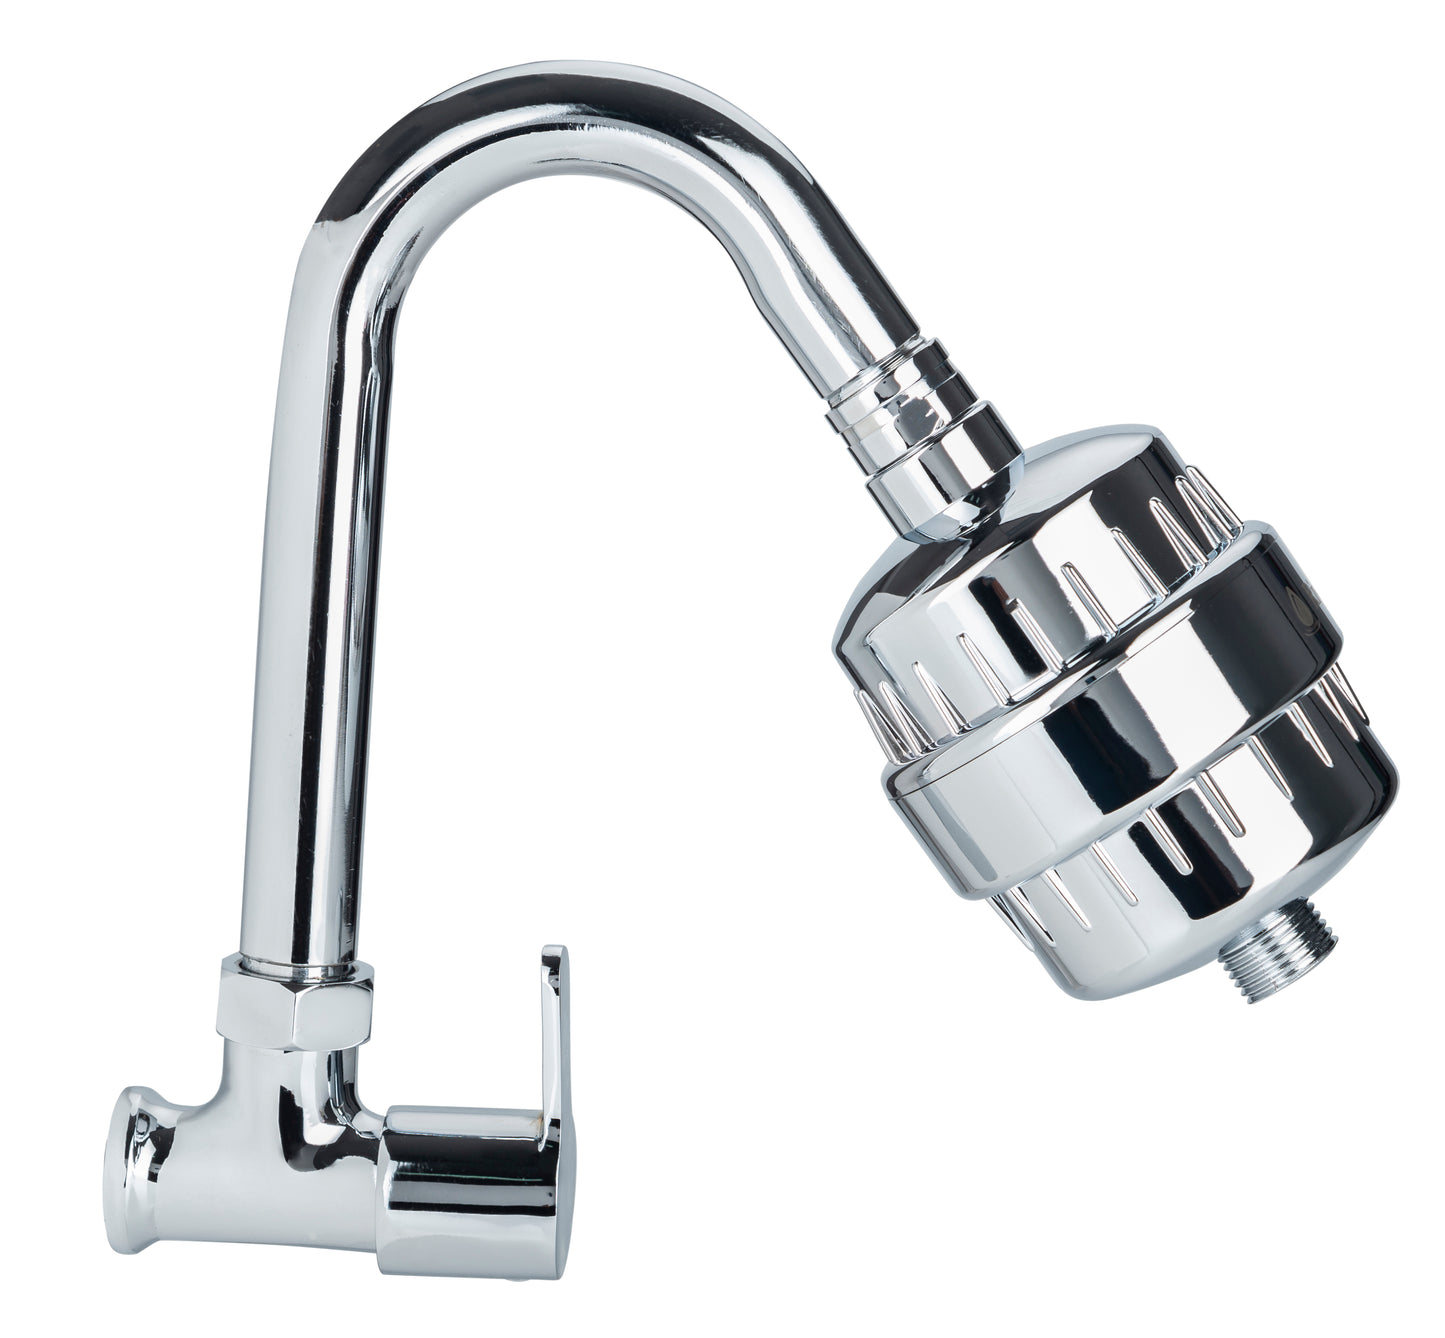 Sink cock fusion kitchen faucet tap with SF-15 Pro for hard water